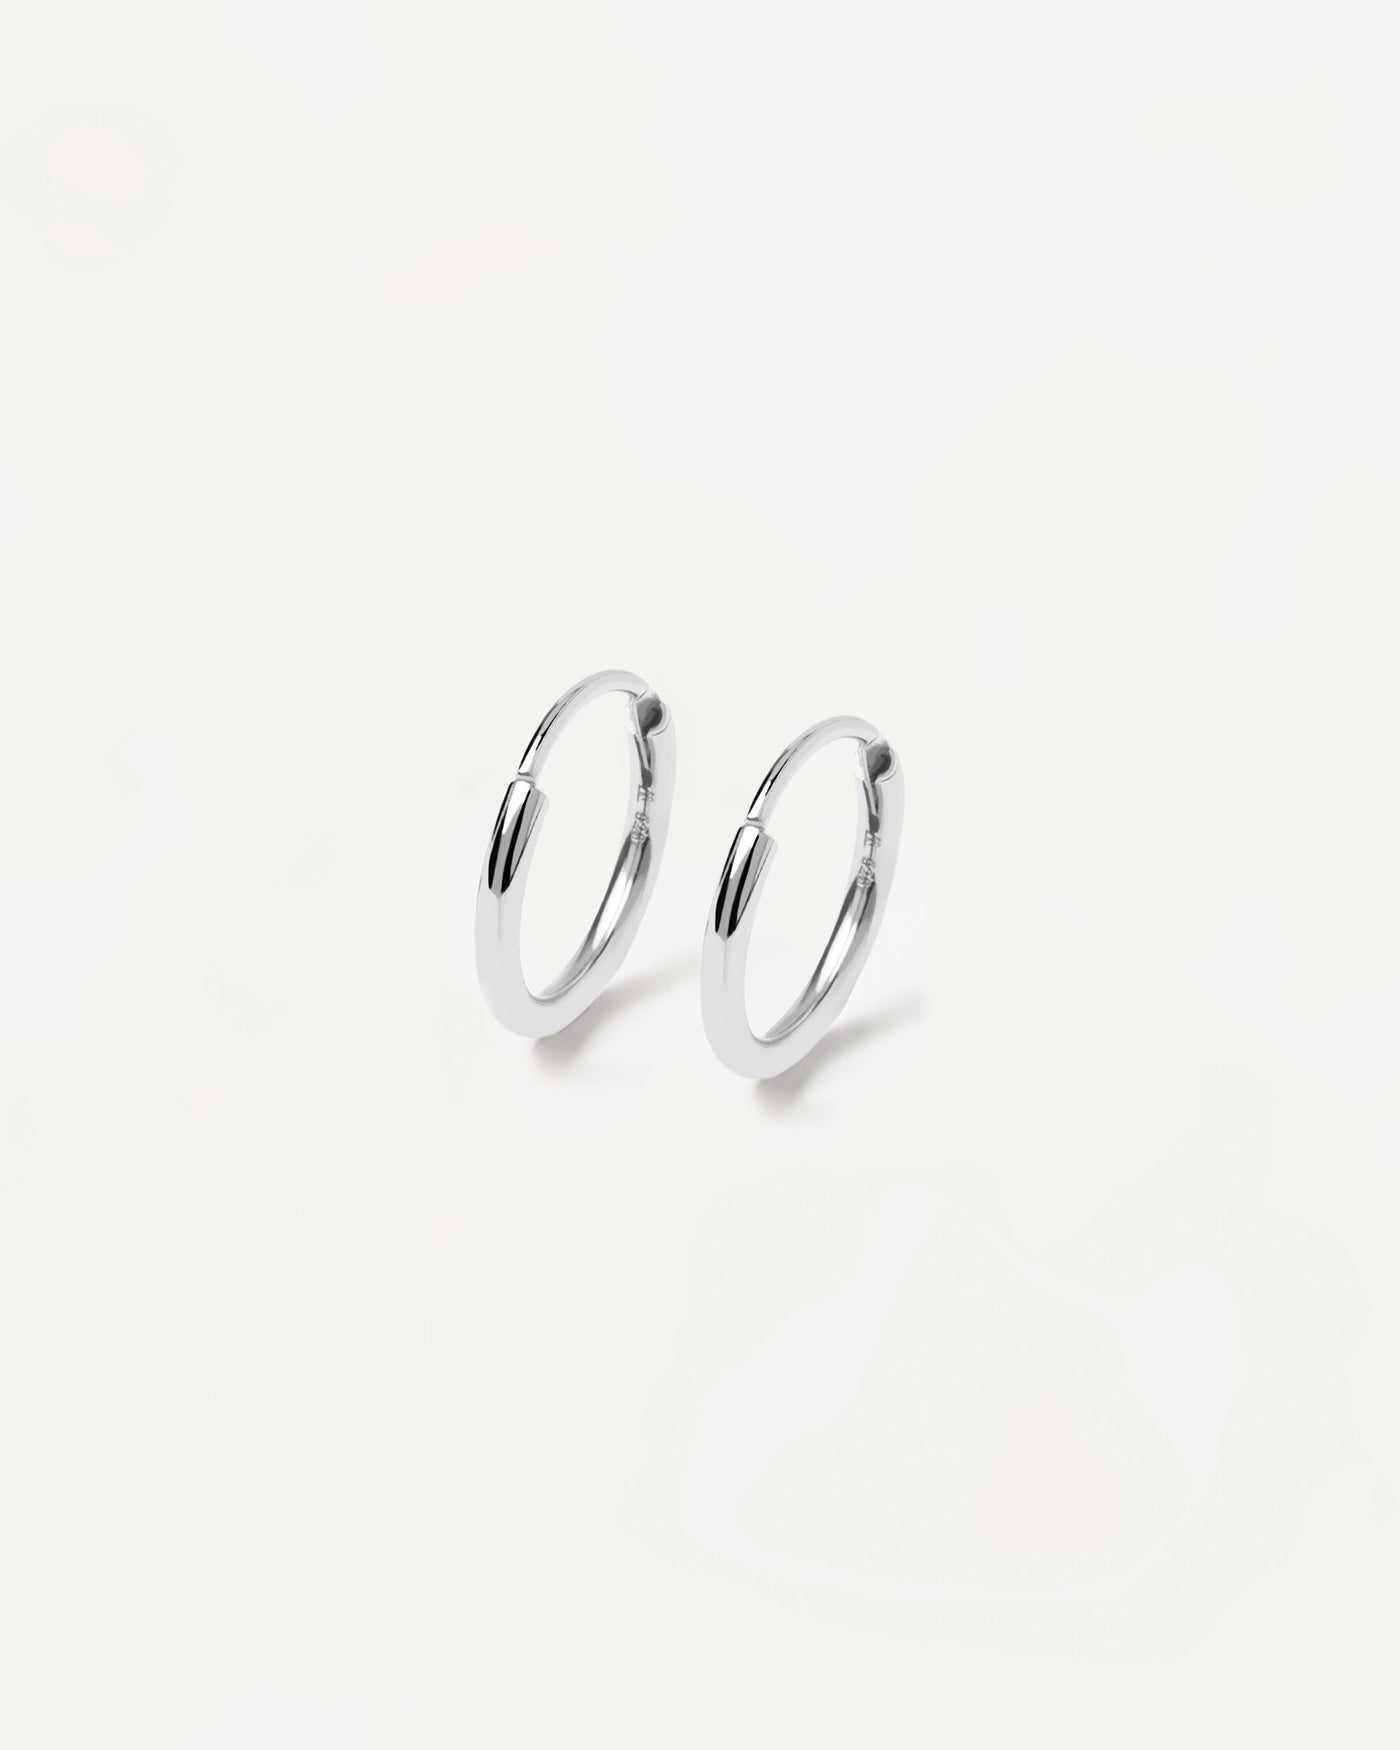 2023 Selection | Mini Hoops Silver. Classic endless hoops made in 925 sterling silver. Get the latest arrival from PDPAOLA. Place your order safely and get this Best Seller. Free Shipping.